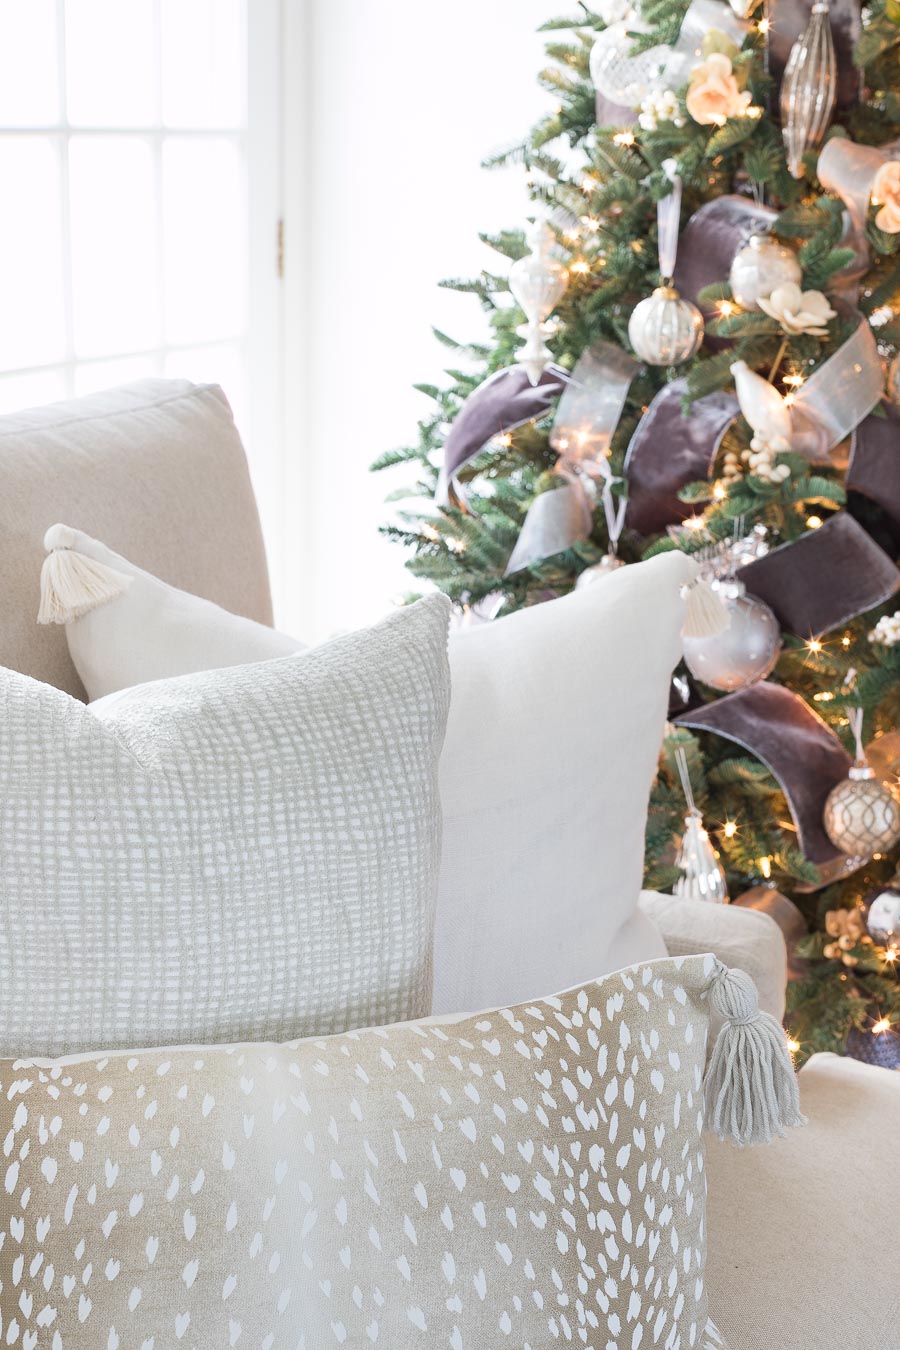 Loving this combination of textured neutral pillows - click through for links to all of them!